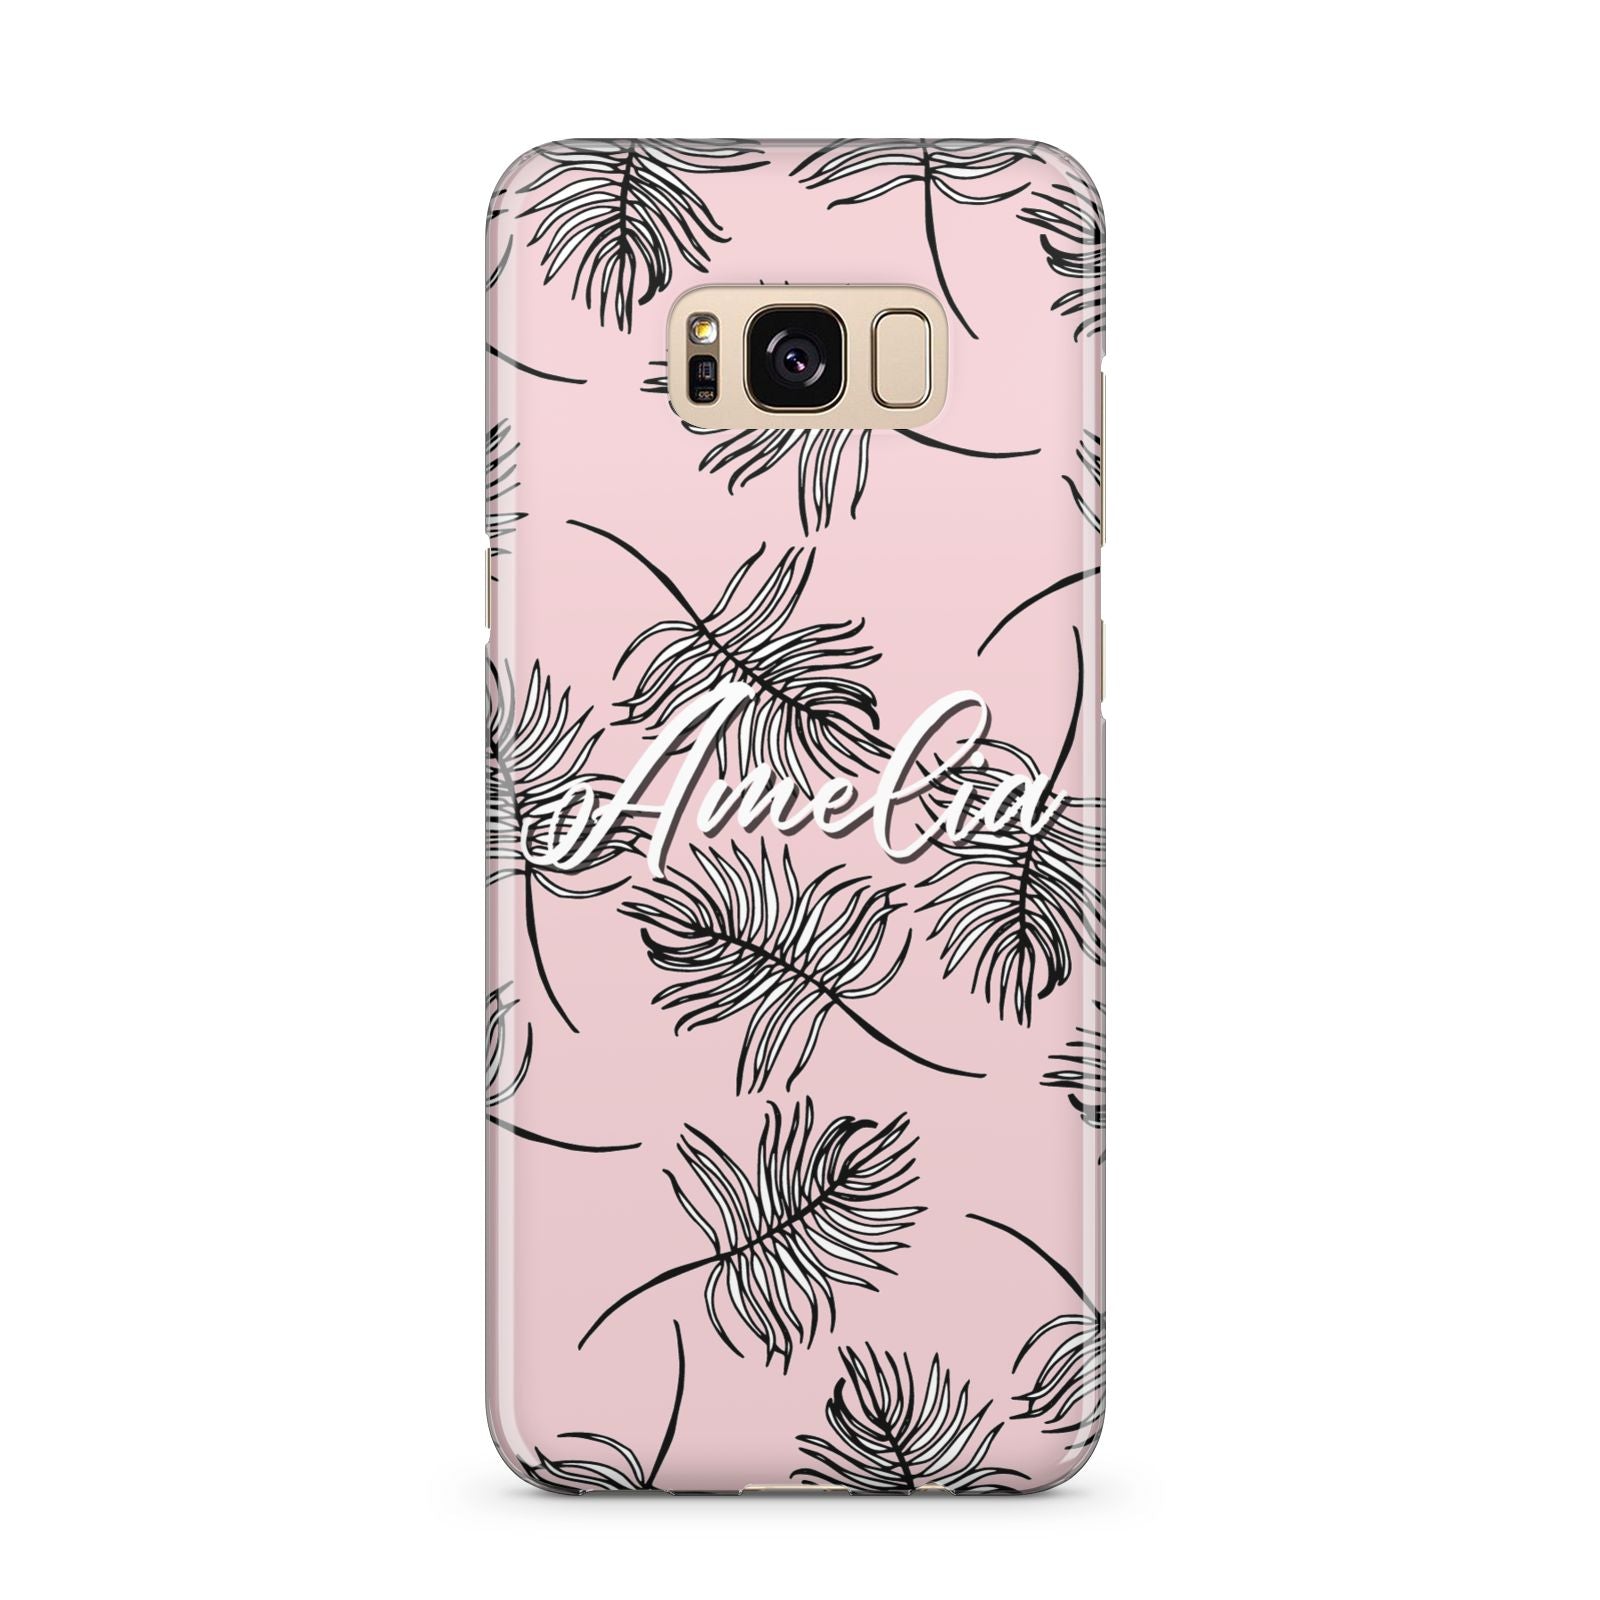 Personalised Pink Monochrome Tropical Leaf Samsung Galaxy S8 Plus Case